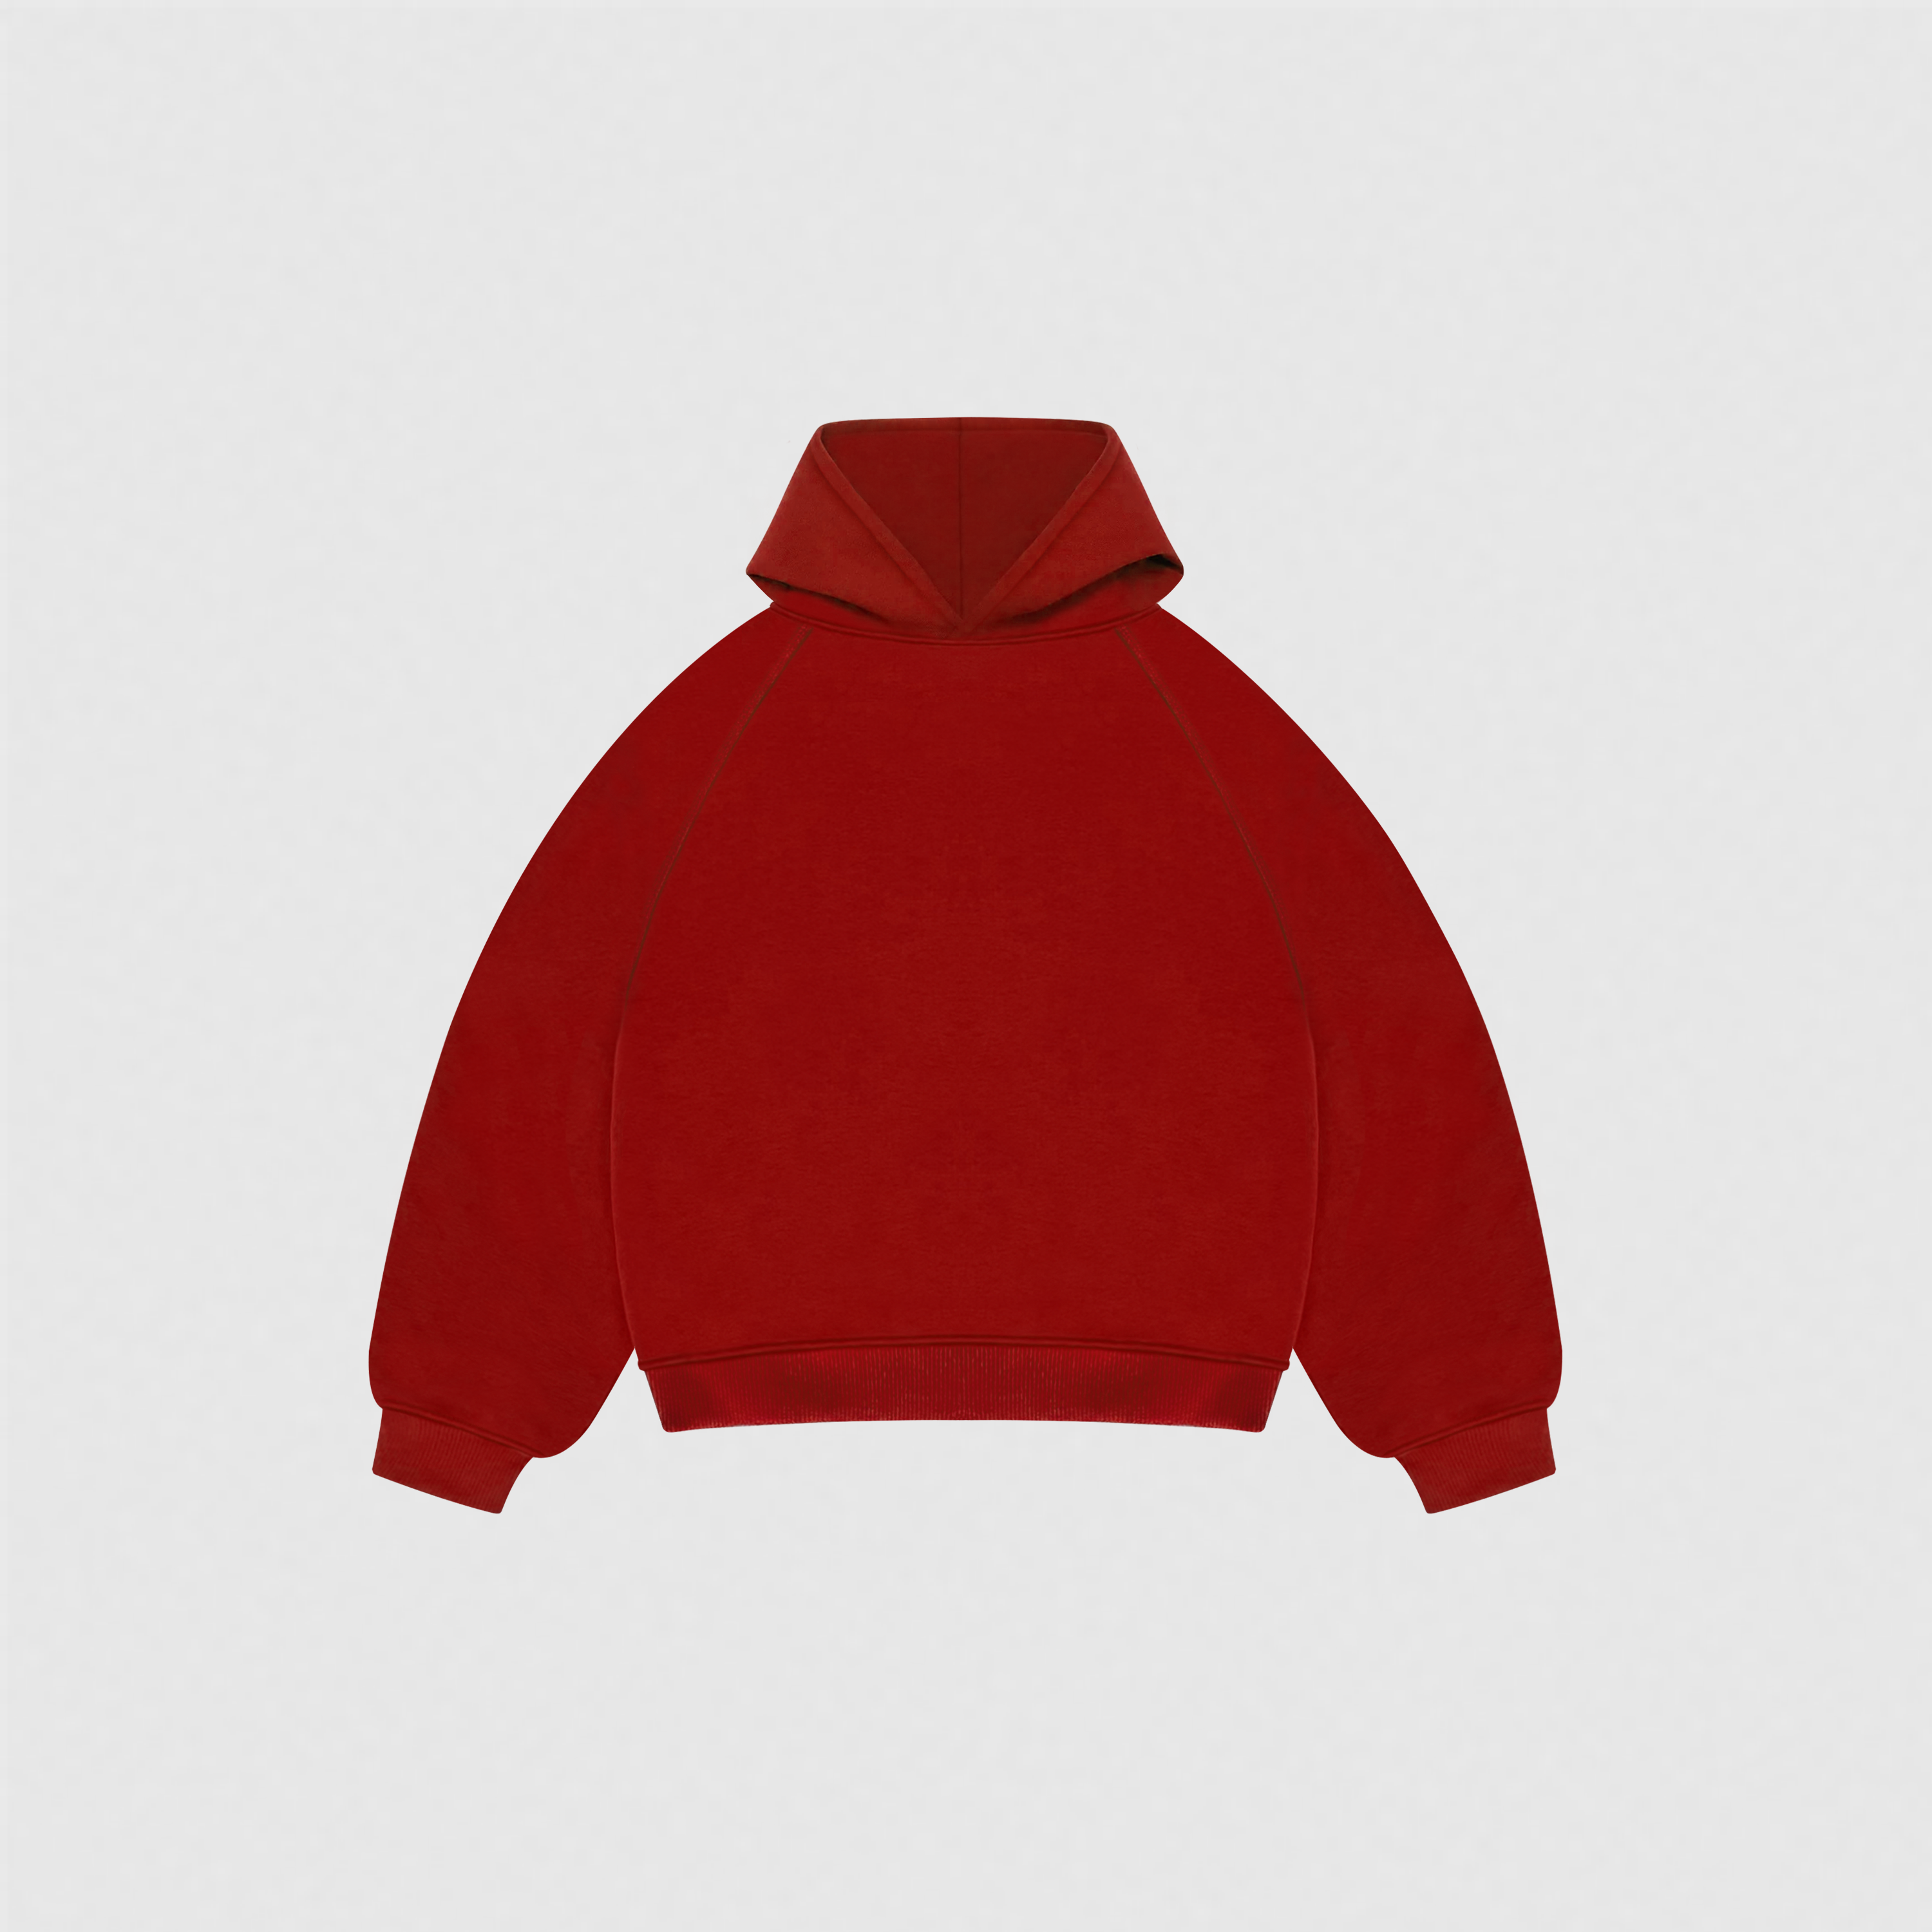 EVERYDAY OXIDE RED HOODIE-Hoodie-Lomalab-2X-SMALL-Red-Lomalab